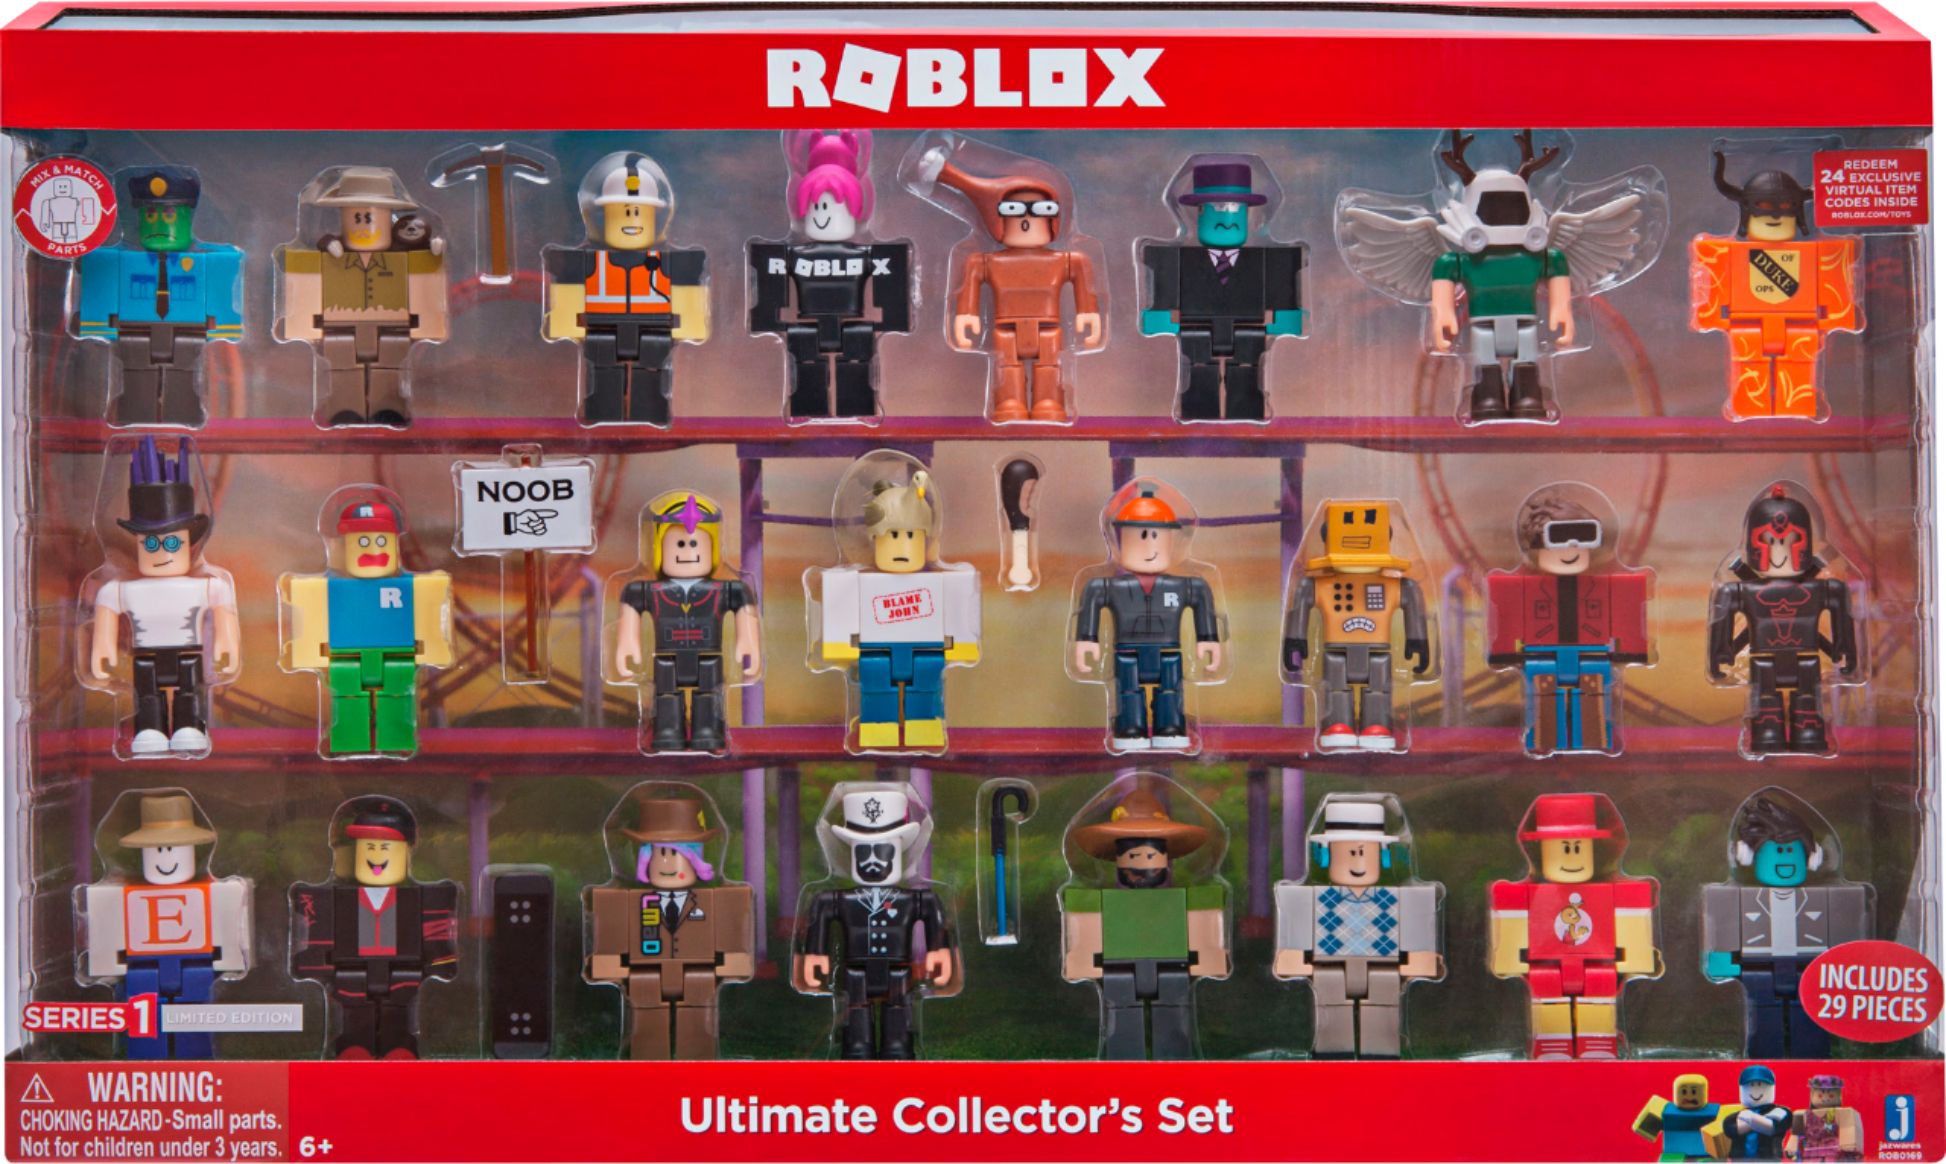 Buying Roblox Toys And Using Codes On The Toy